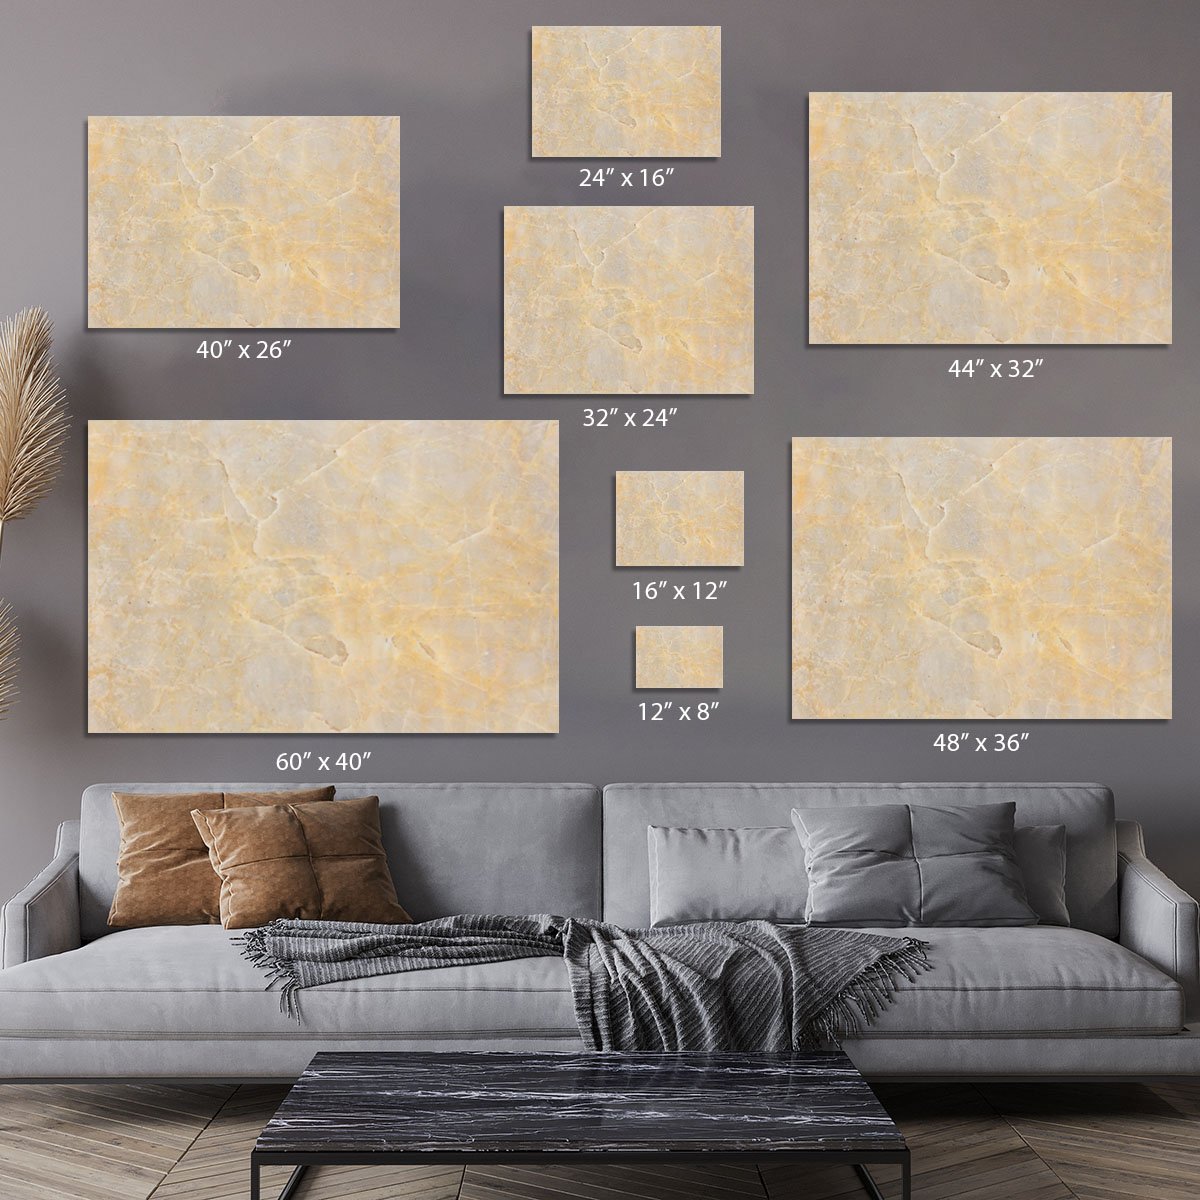 Textured Beige Marble Canvas Print or Poster